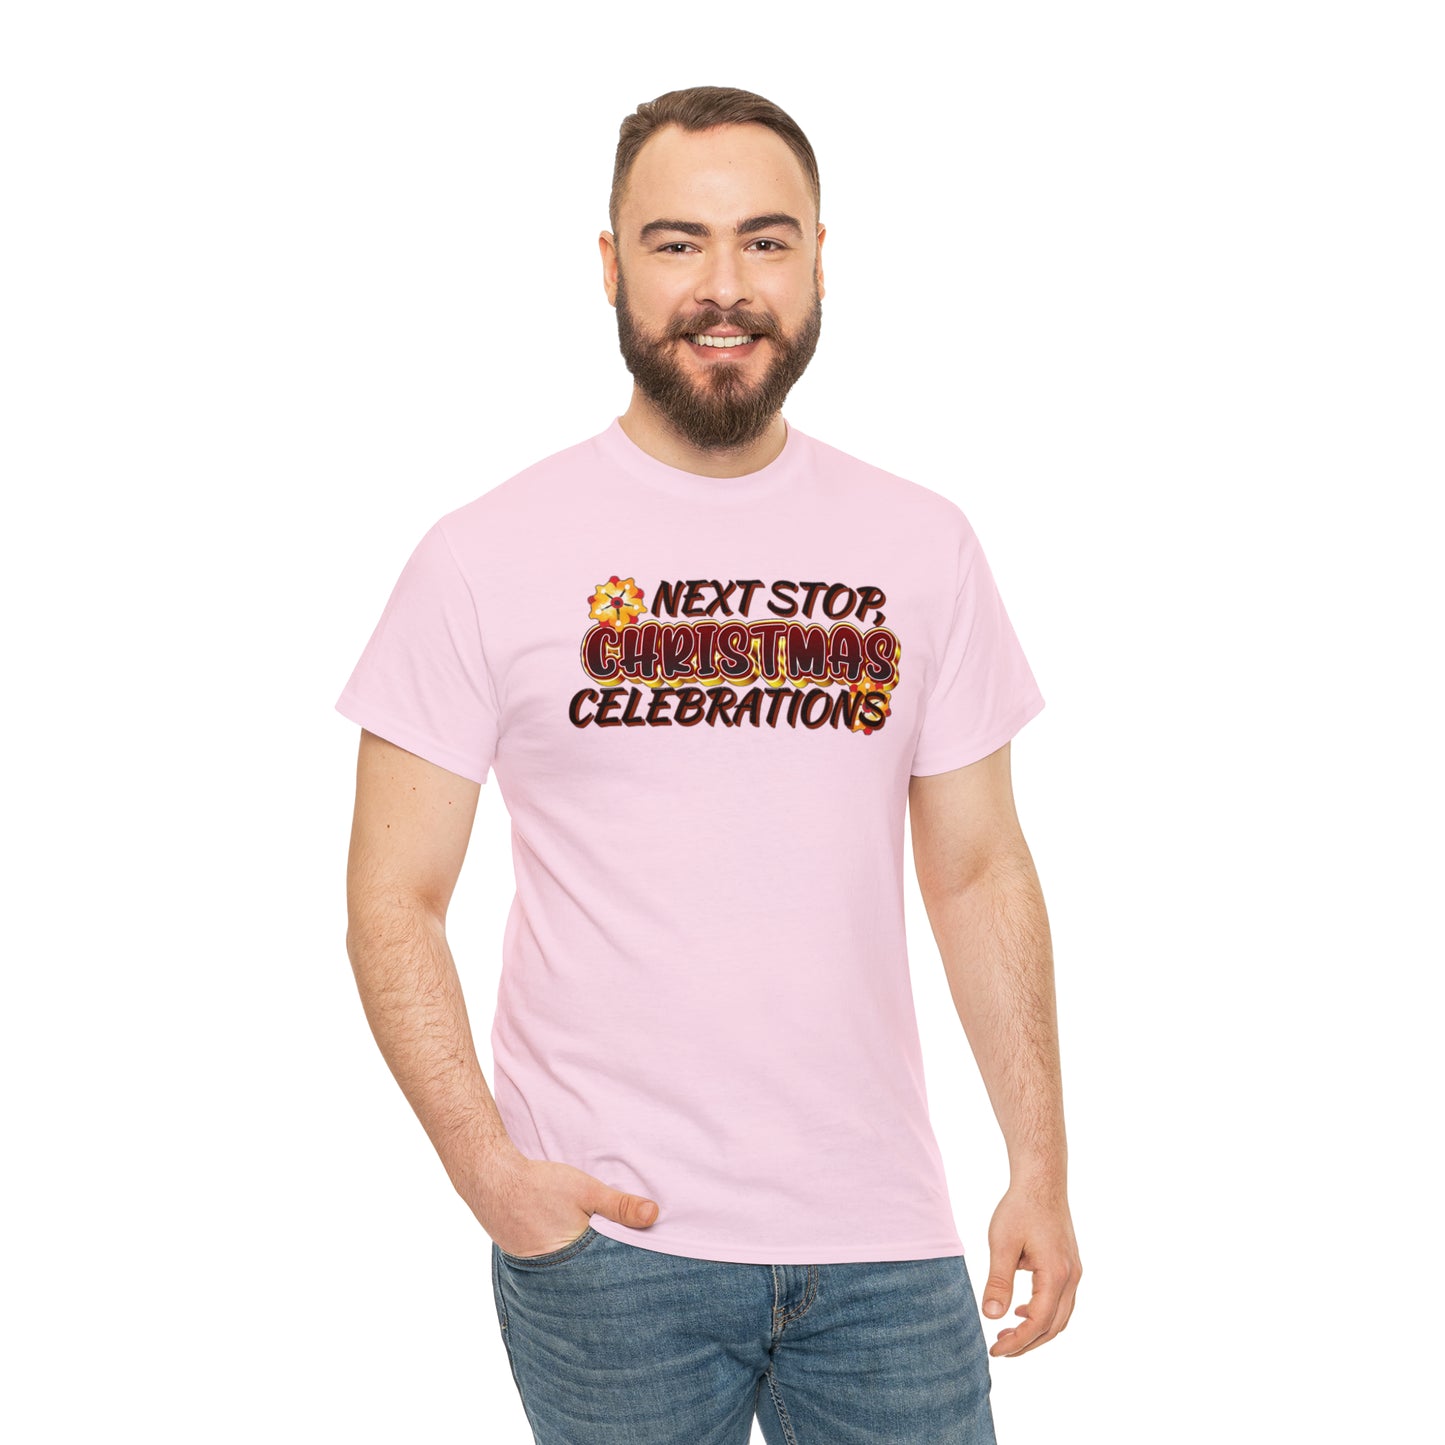 Next Stop Christmas Celebrations - Heavy Cotton Tee for Men and Women